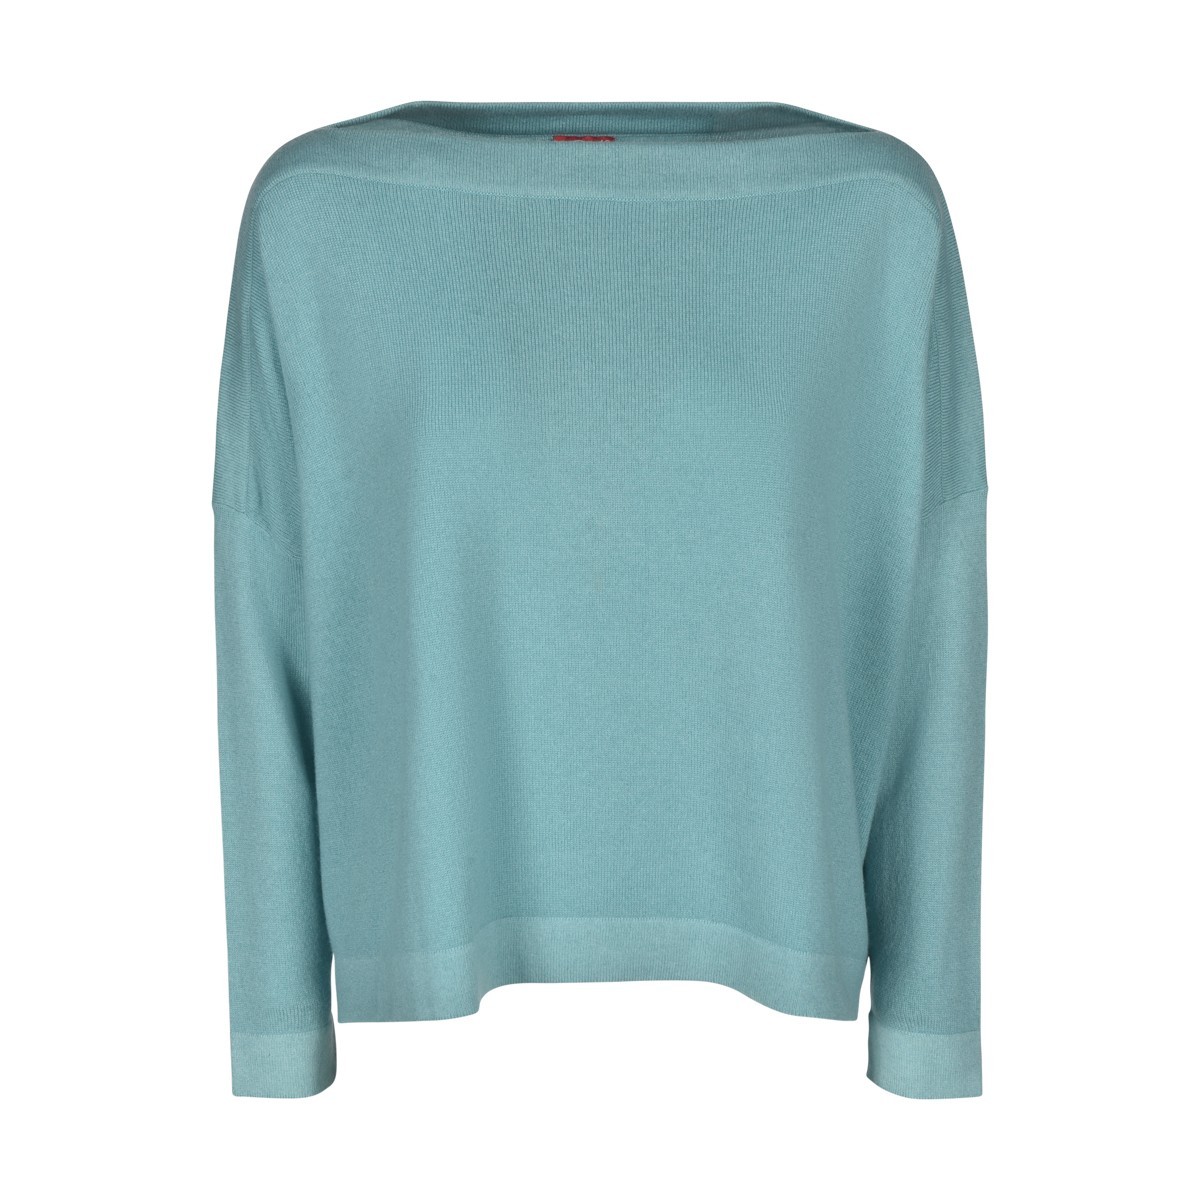 Teal Cashmere Daisy Sweater